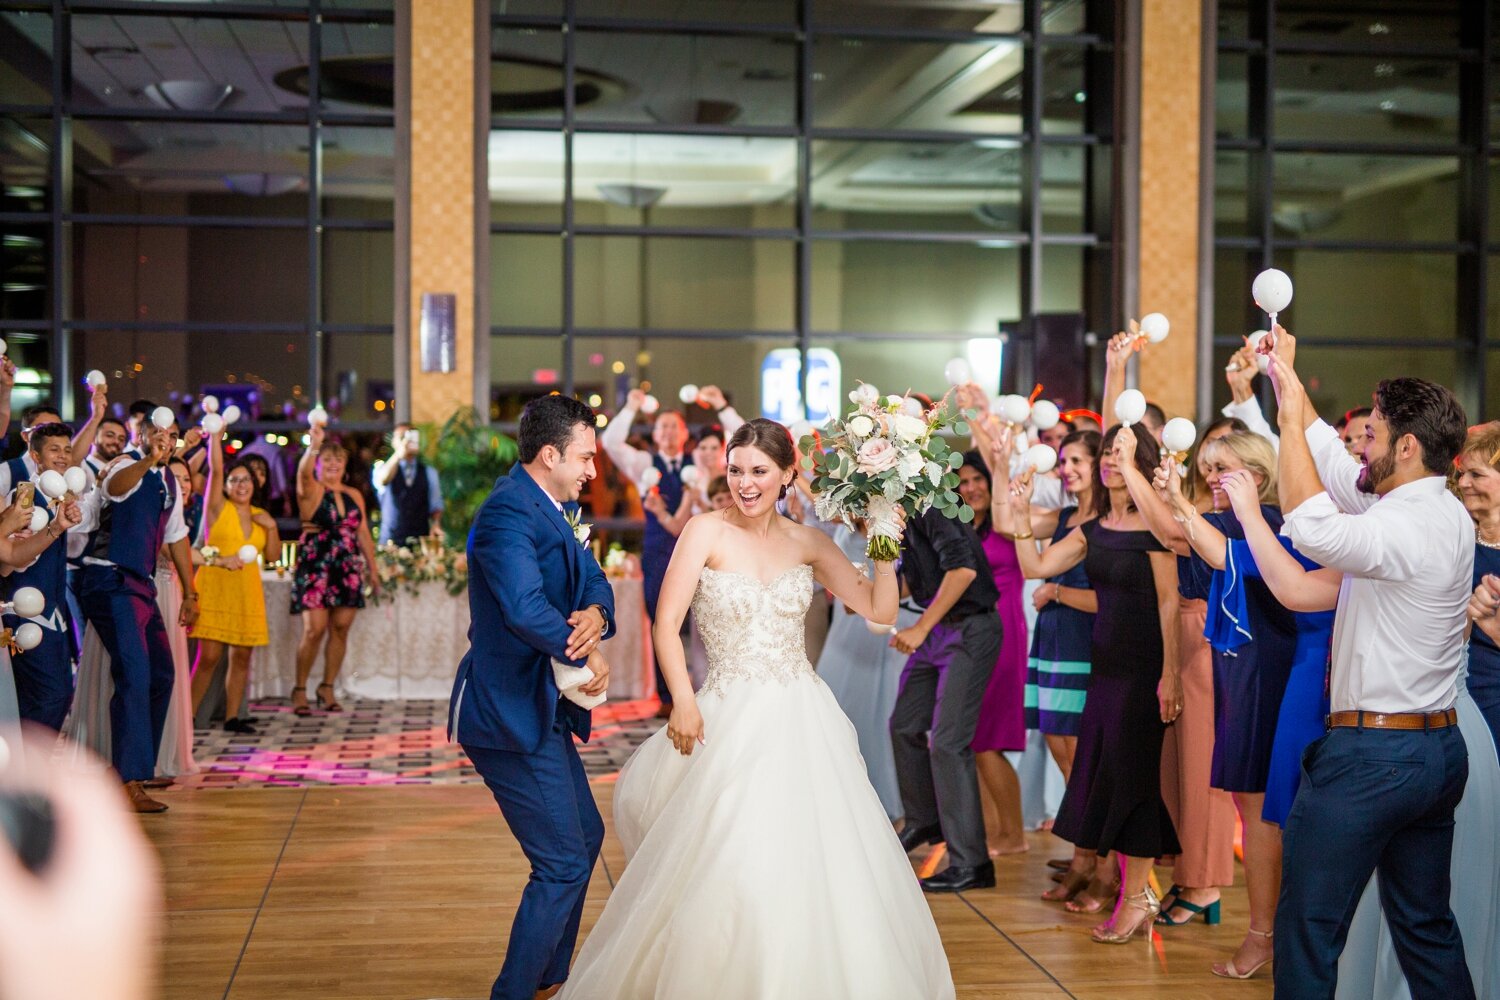  One of the most fun exits from any reception ever! 